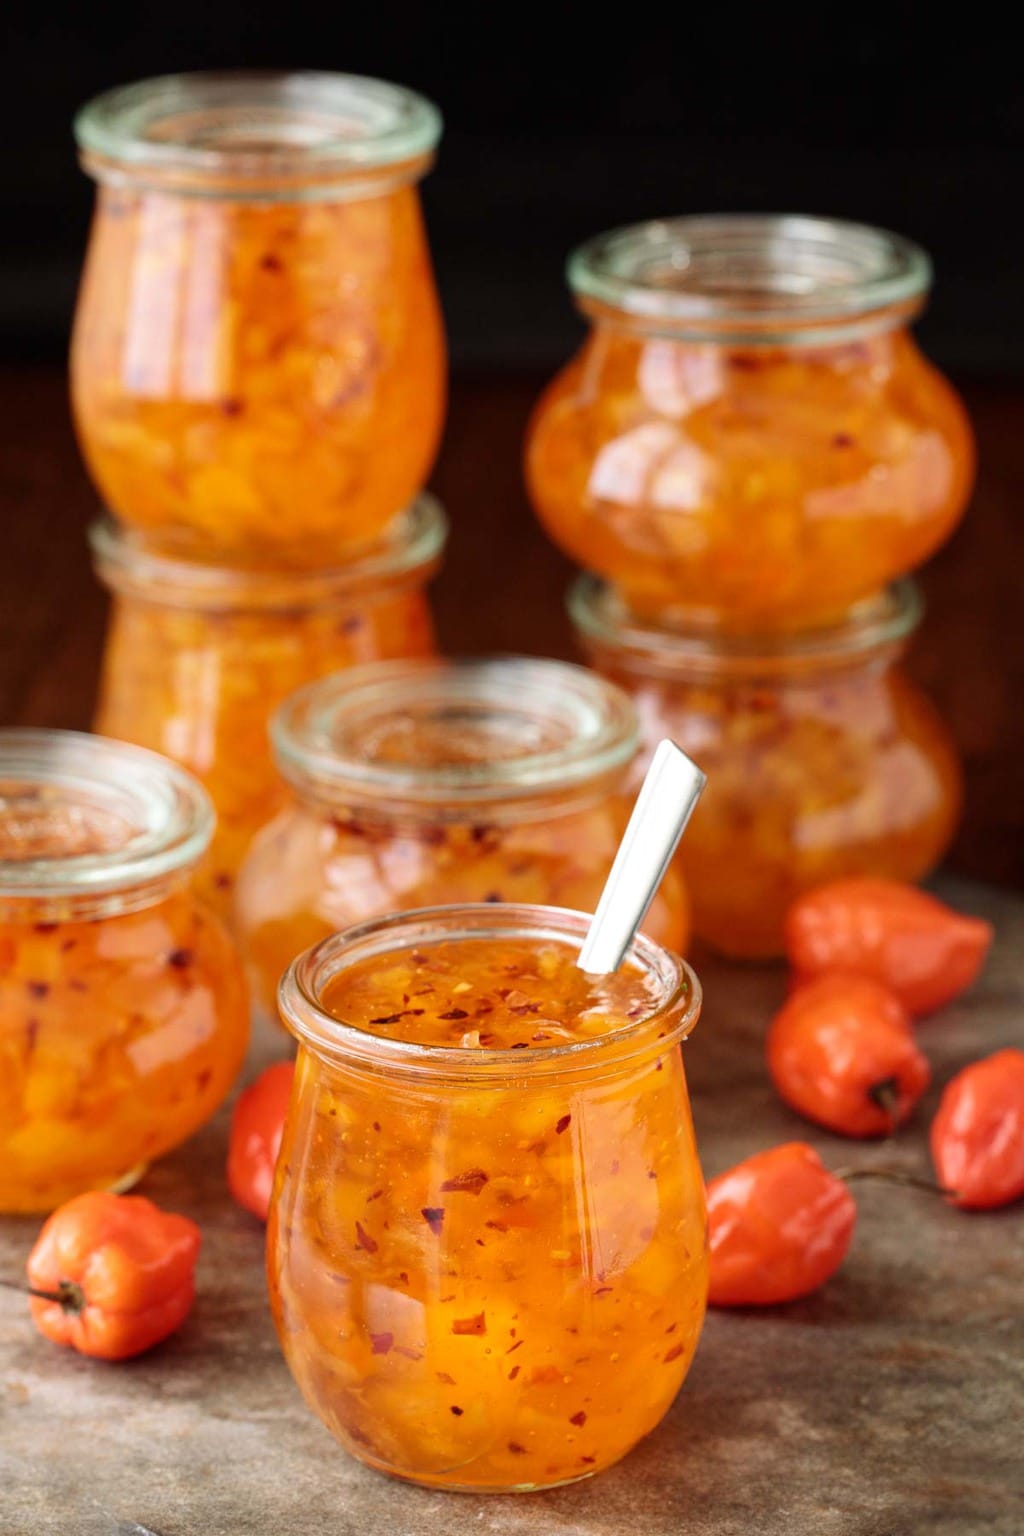 A photo of glass jars filled with Pineapple Habanero Pepper Jelly on a slate table. Jars are stacked up in the background.